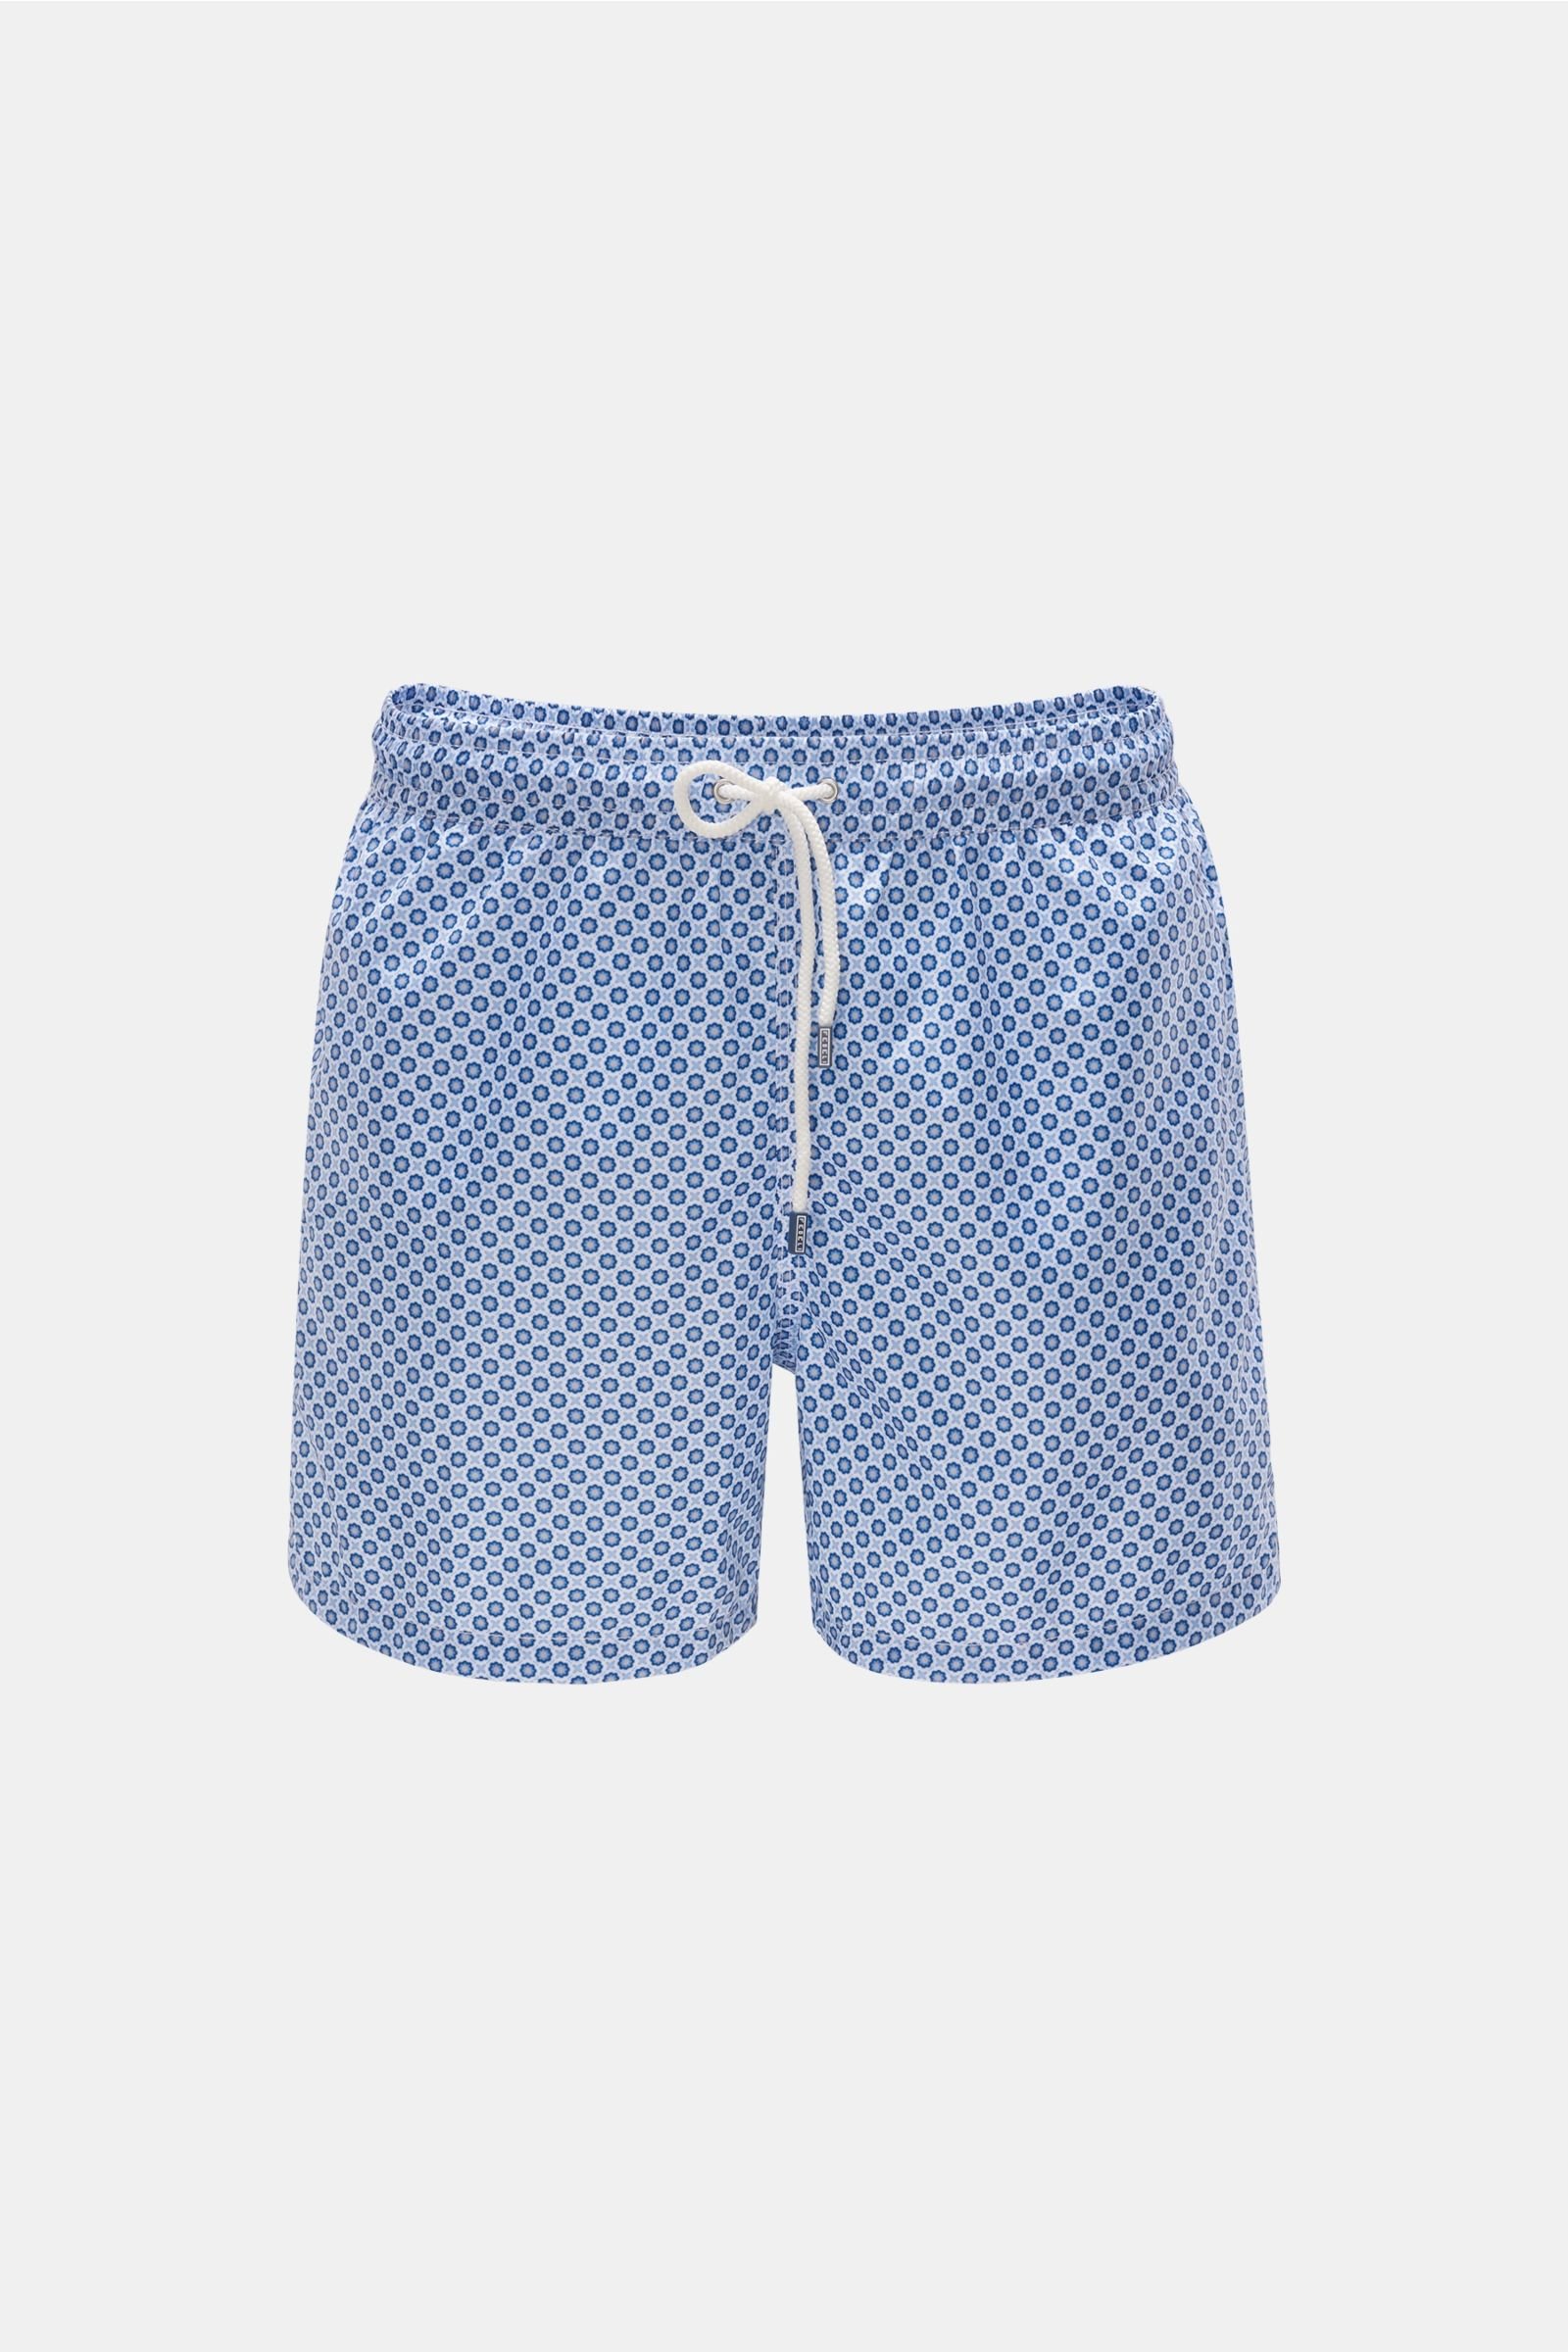 Swim shorts 'Madeira Airstop' navy/smoky blue patterned